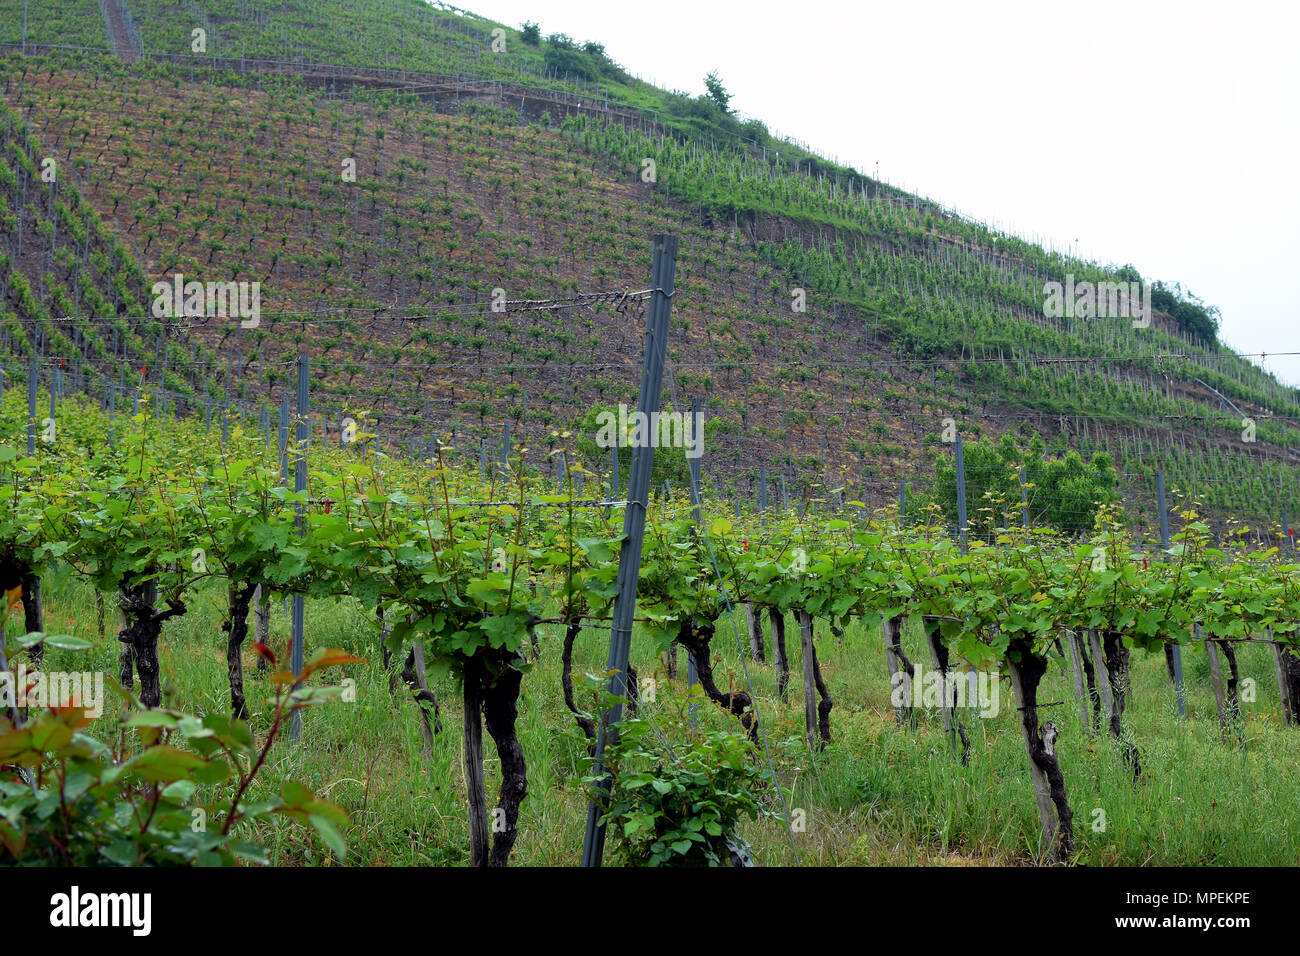 Vineyards at the Moselle Valley, Germany Stock Photo